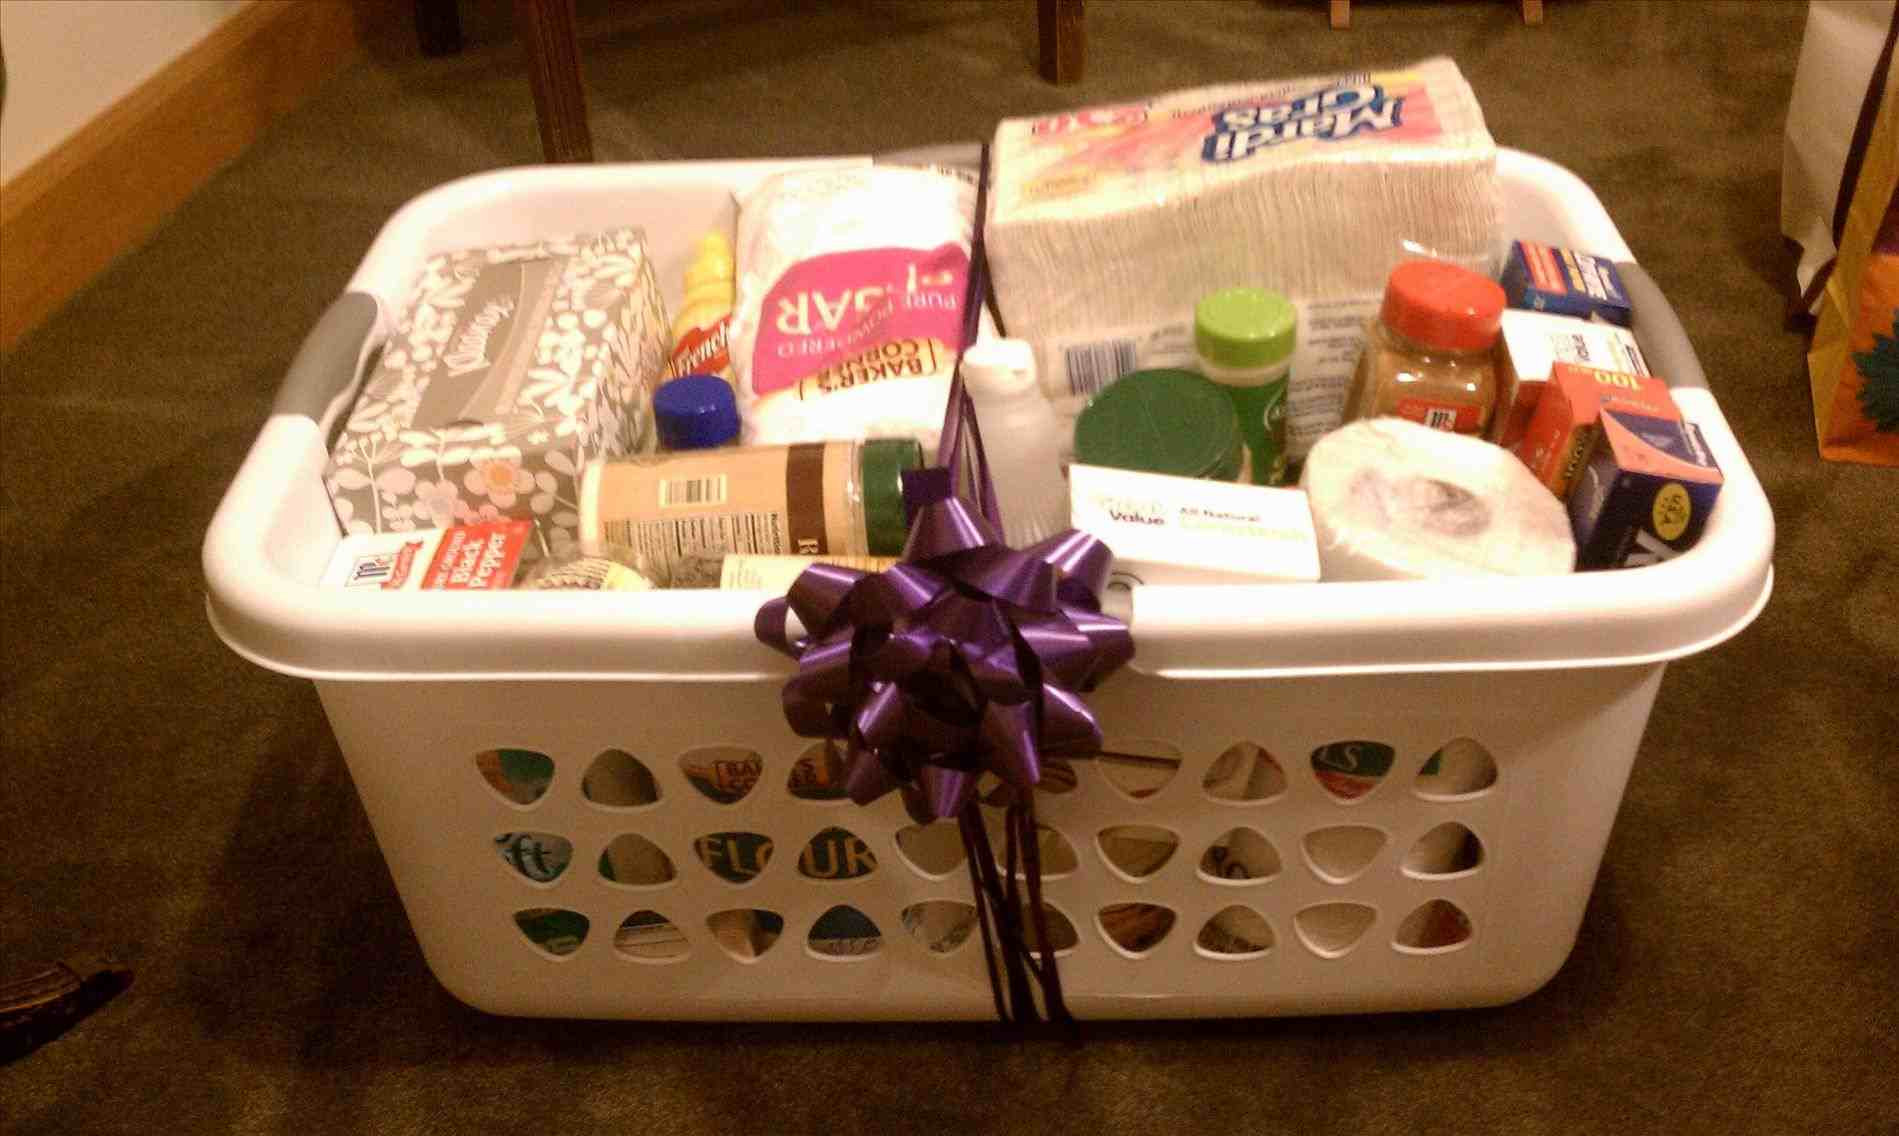 New Home Gift Basket Ideas
 More About diy housewarming t ideas Update ipmserie